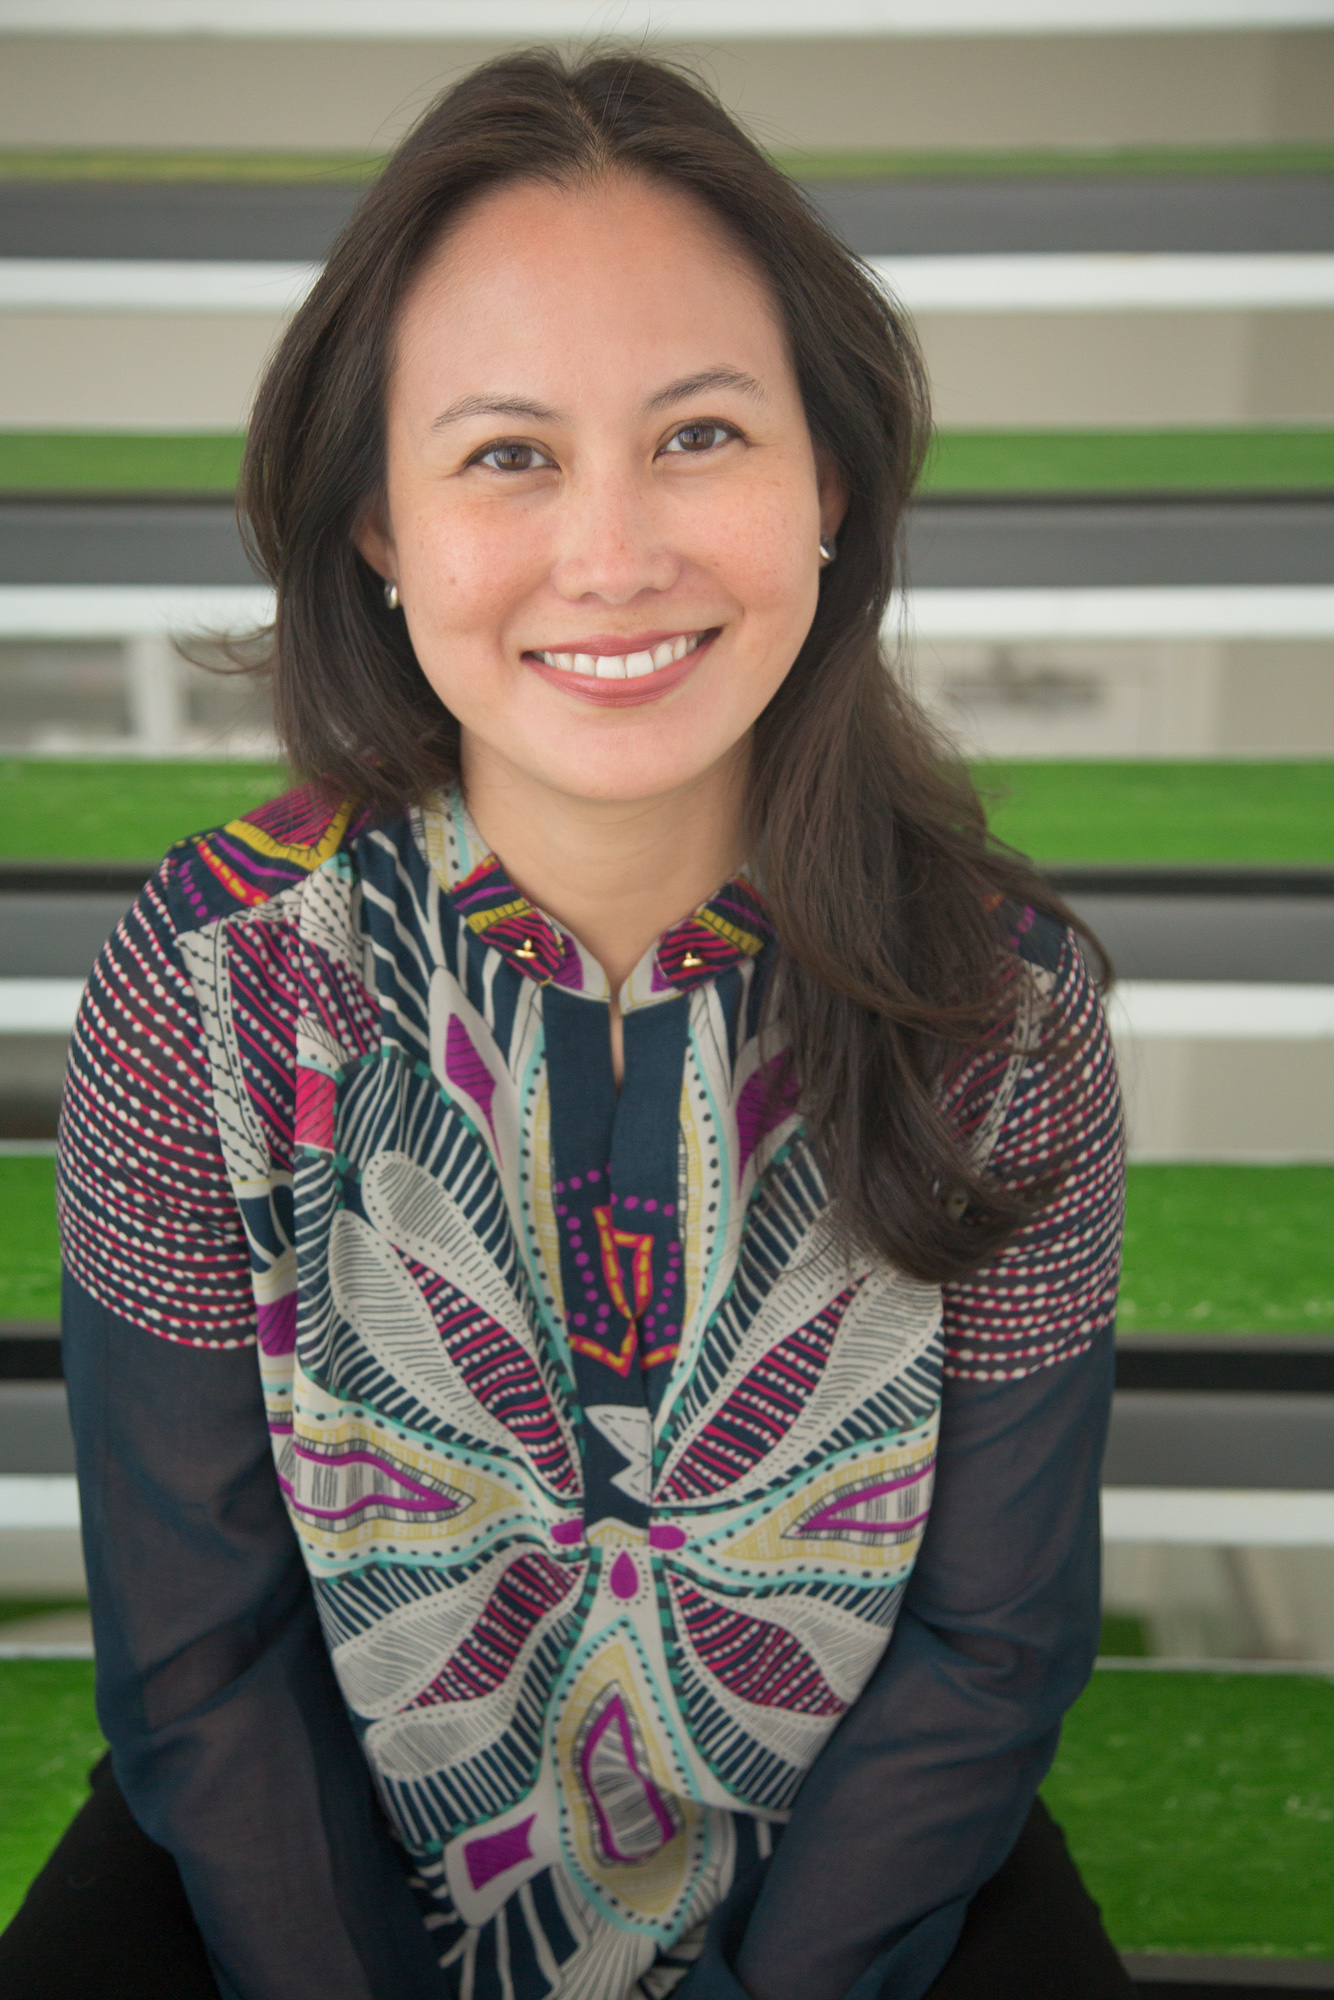 Meet Celina Agaton, the founder of MapPH who has been helping revitalize local economies through heritage preservation, food security, and sustainable tourism